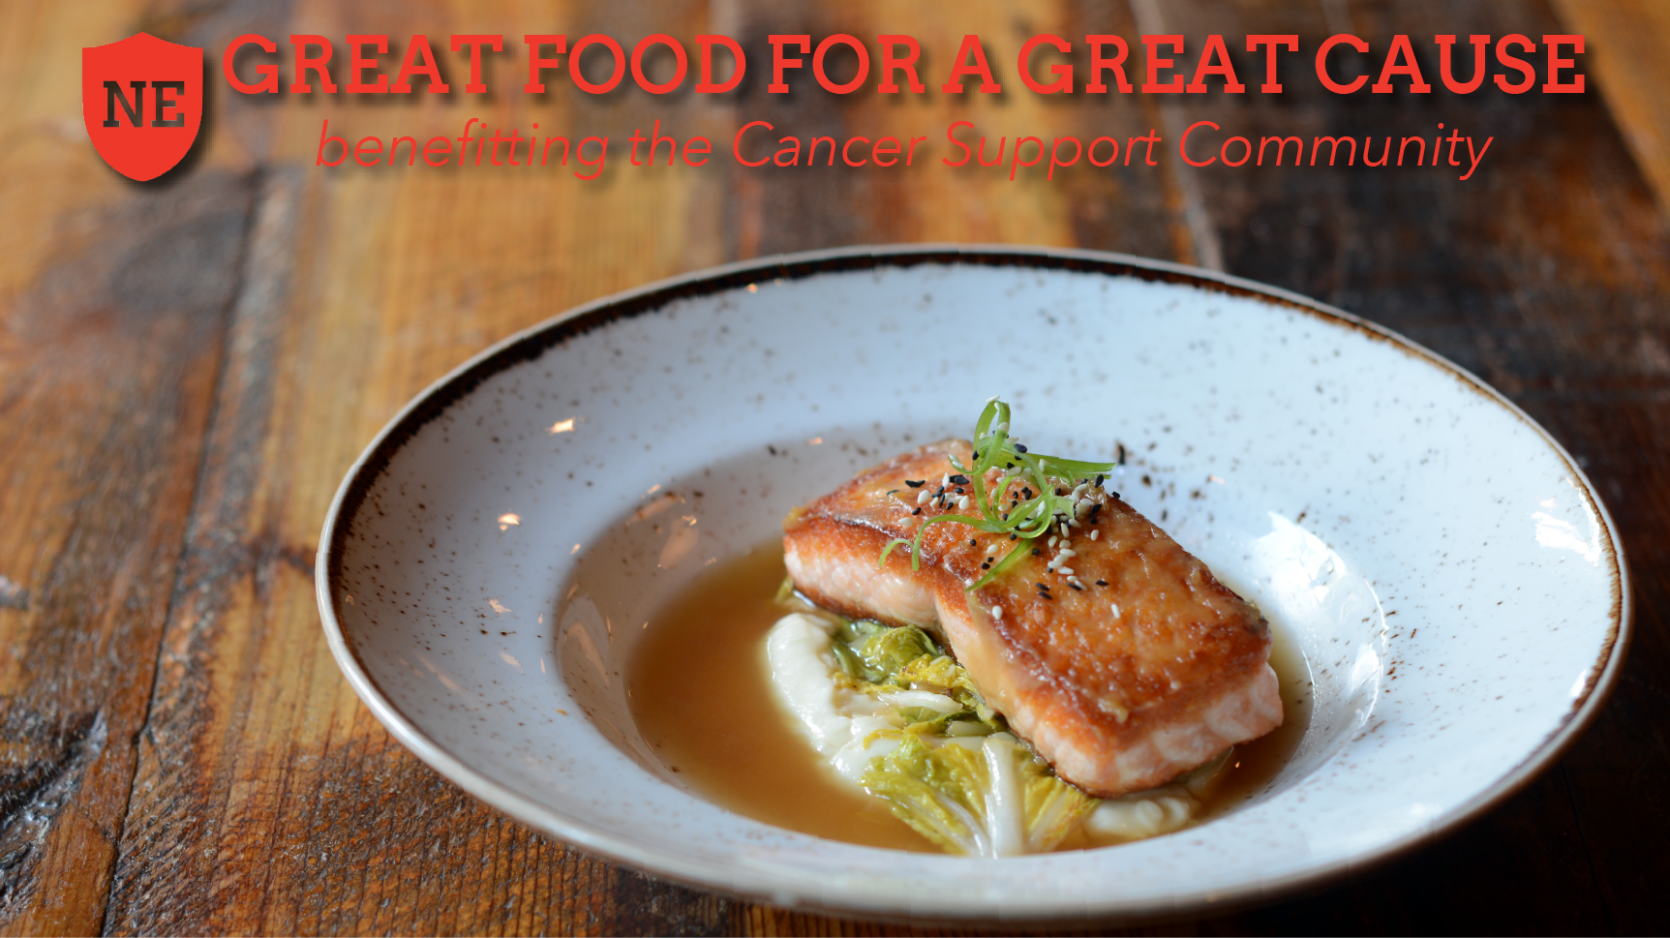 Great Food for a Great Cause: Cancer Support Community